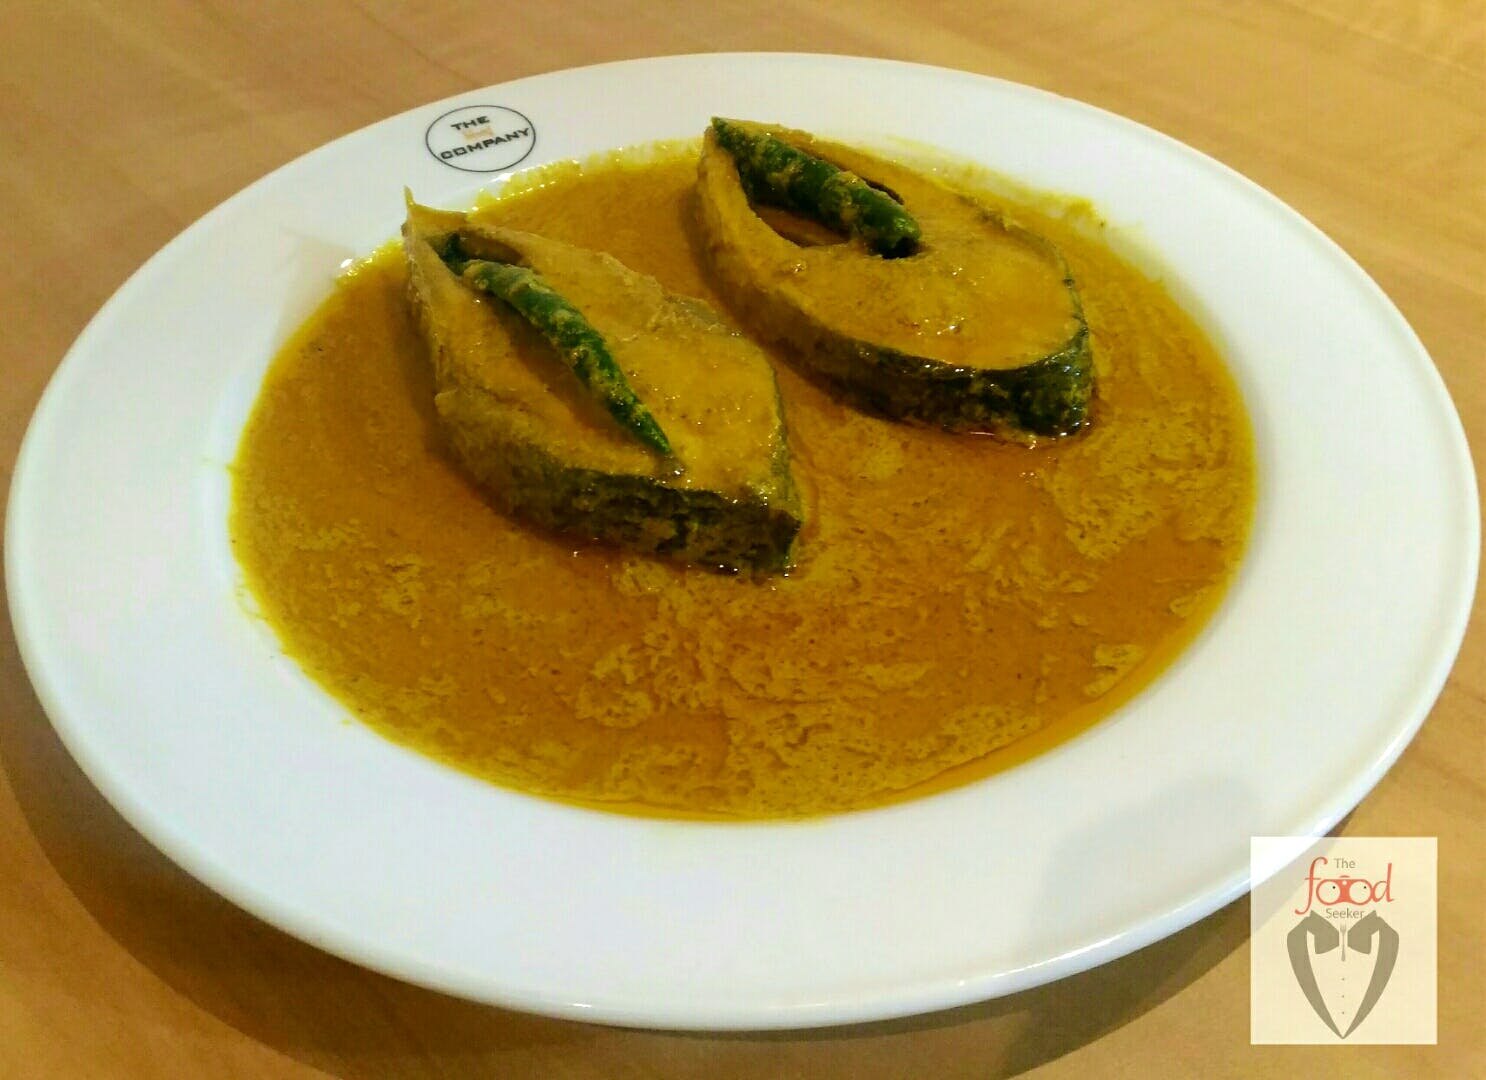 Dish,Food,Cuisine,Ingredient,Curry,Yellow curry,Produce,Gulai,À la carte food,Stew